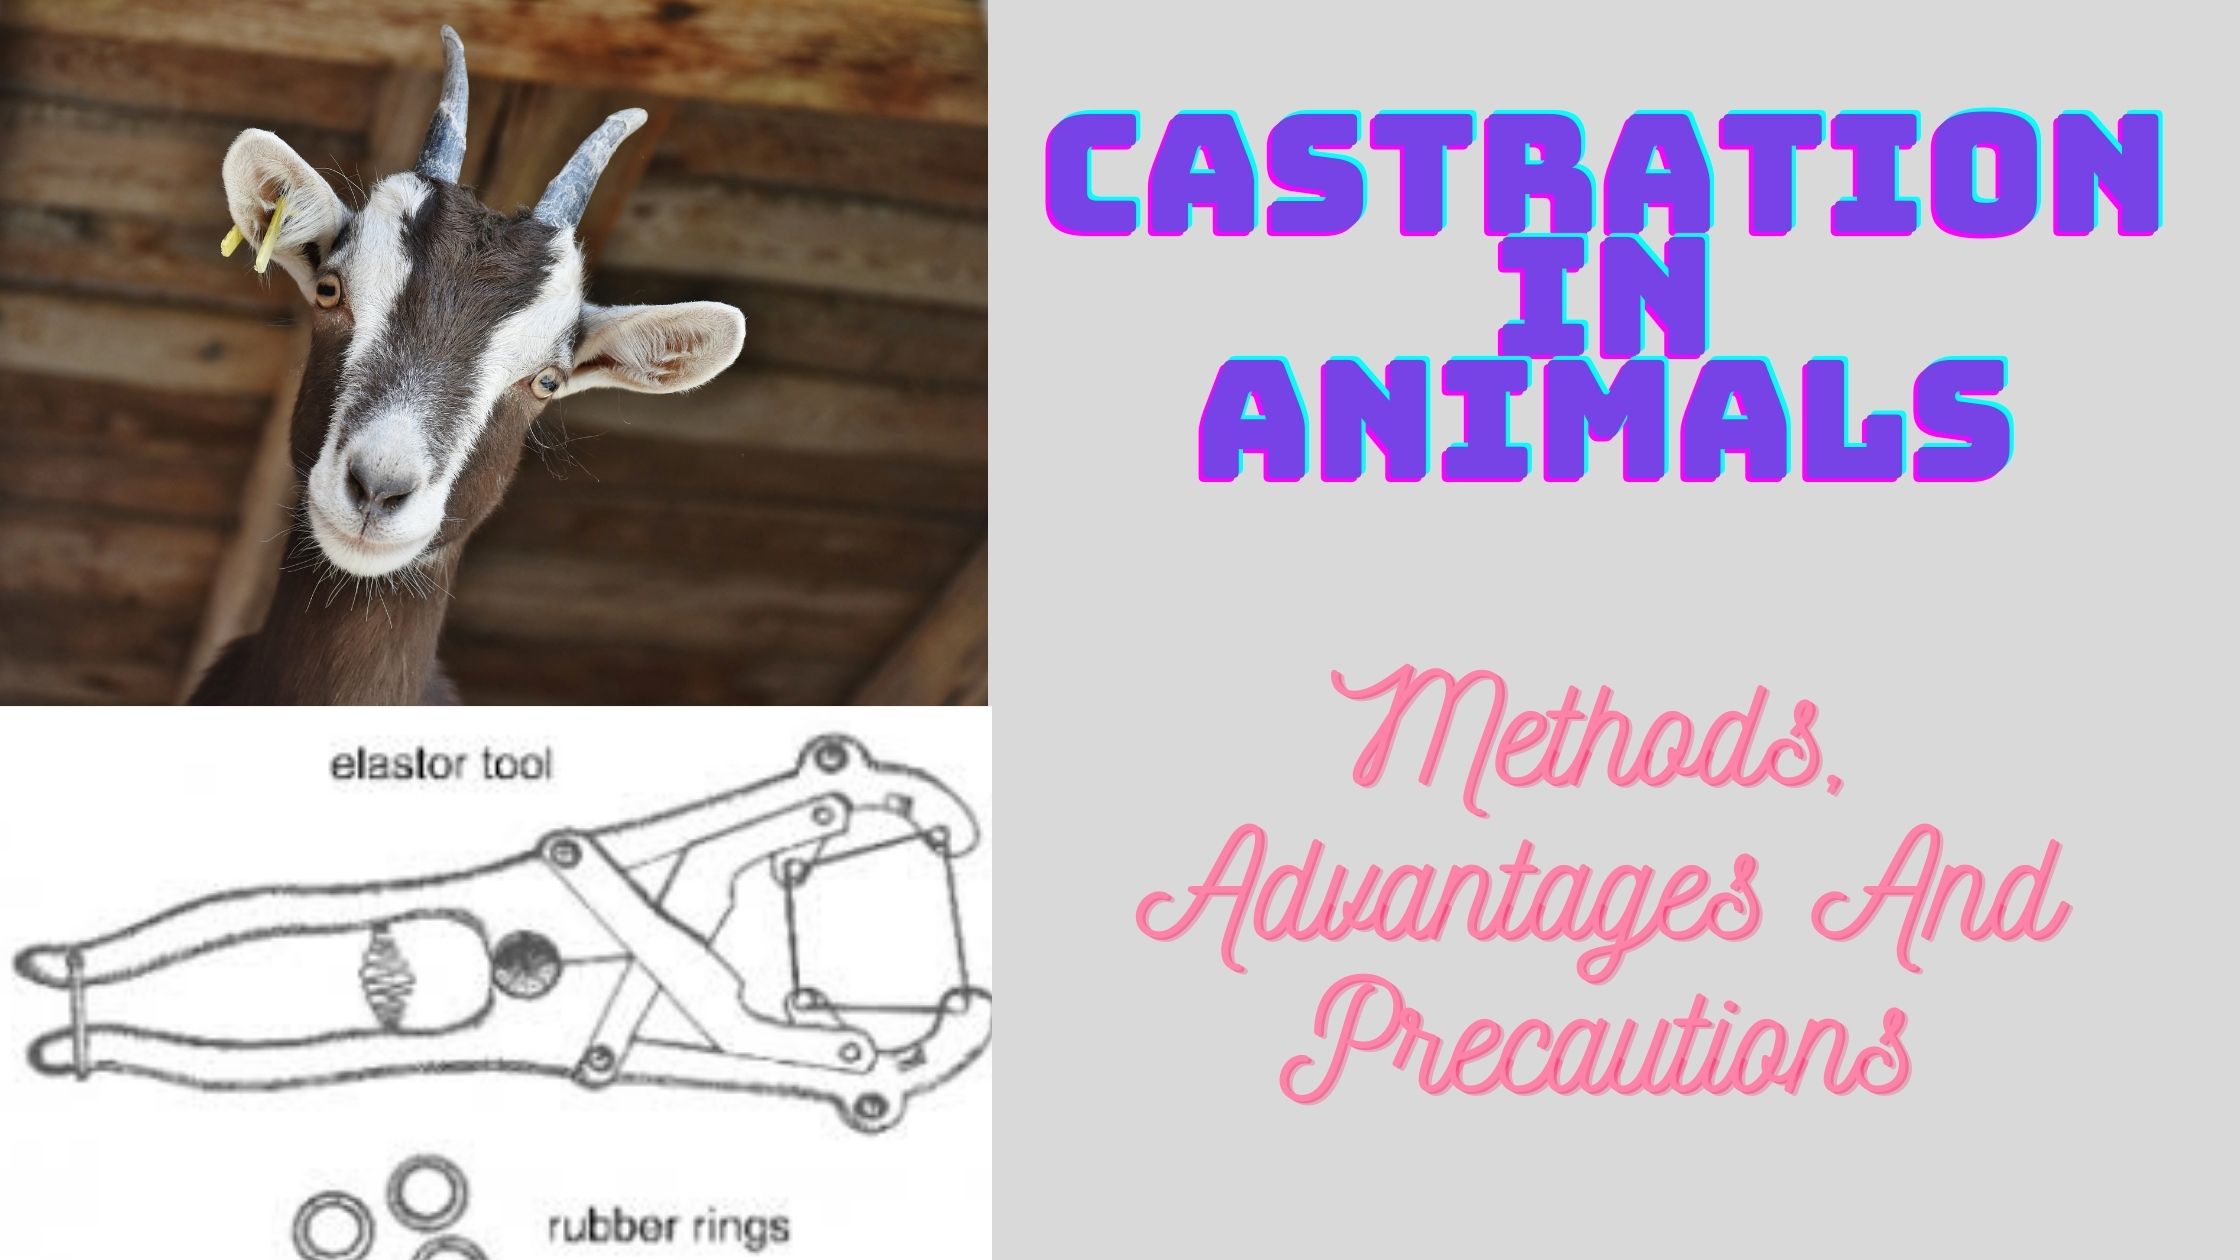 Methods of castration in farm animals